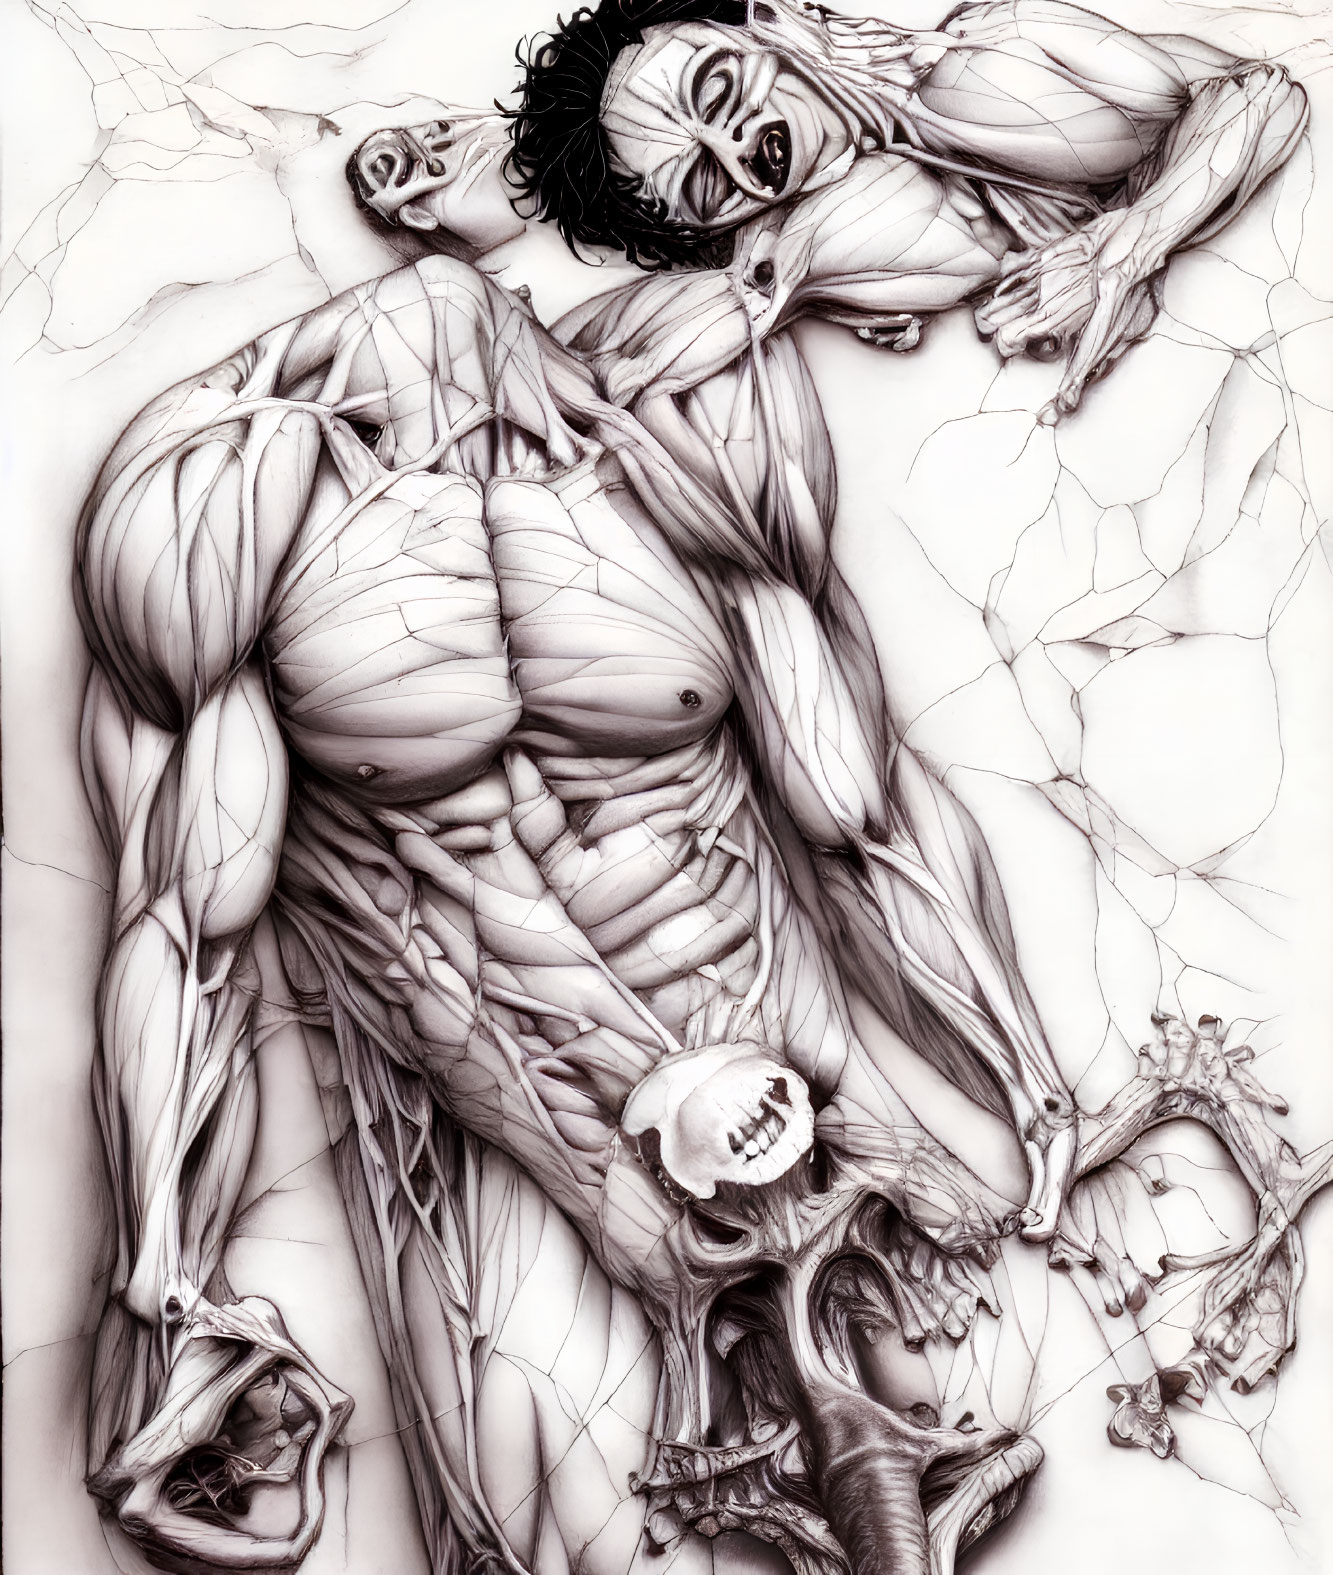 Detailed pencil drawing of human figures with exposed musculature and skeletal remains.